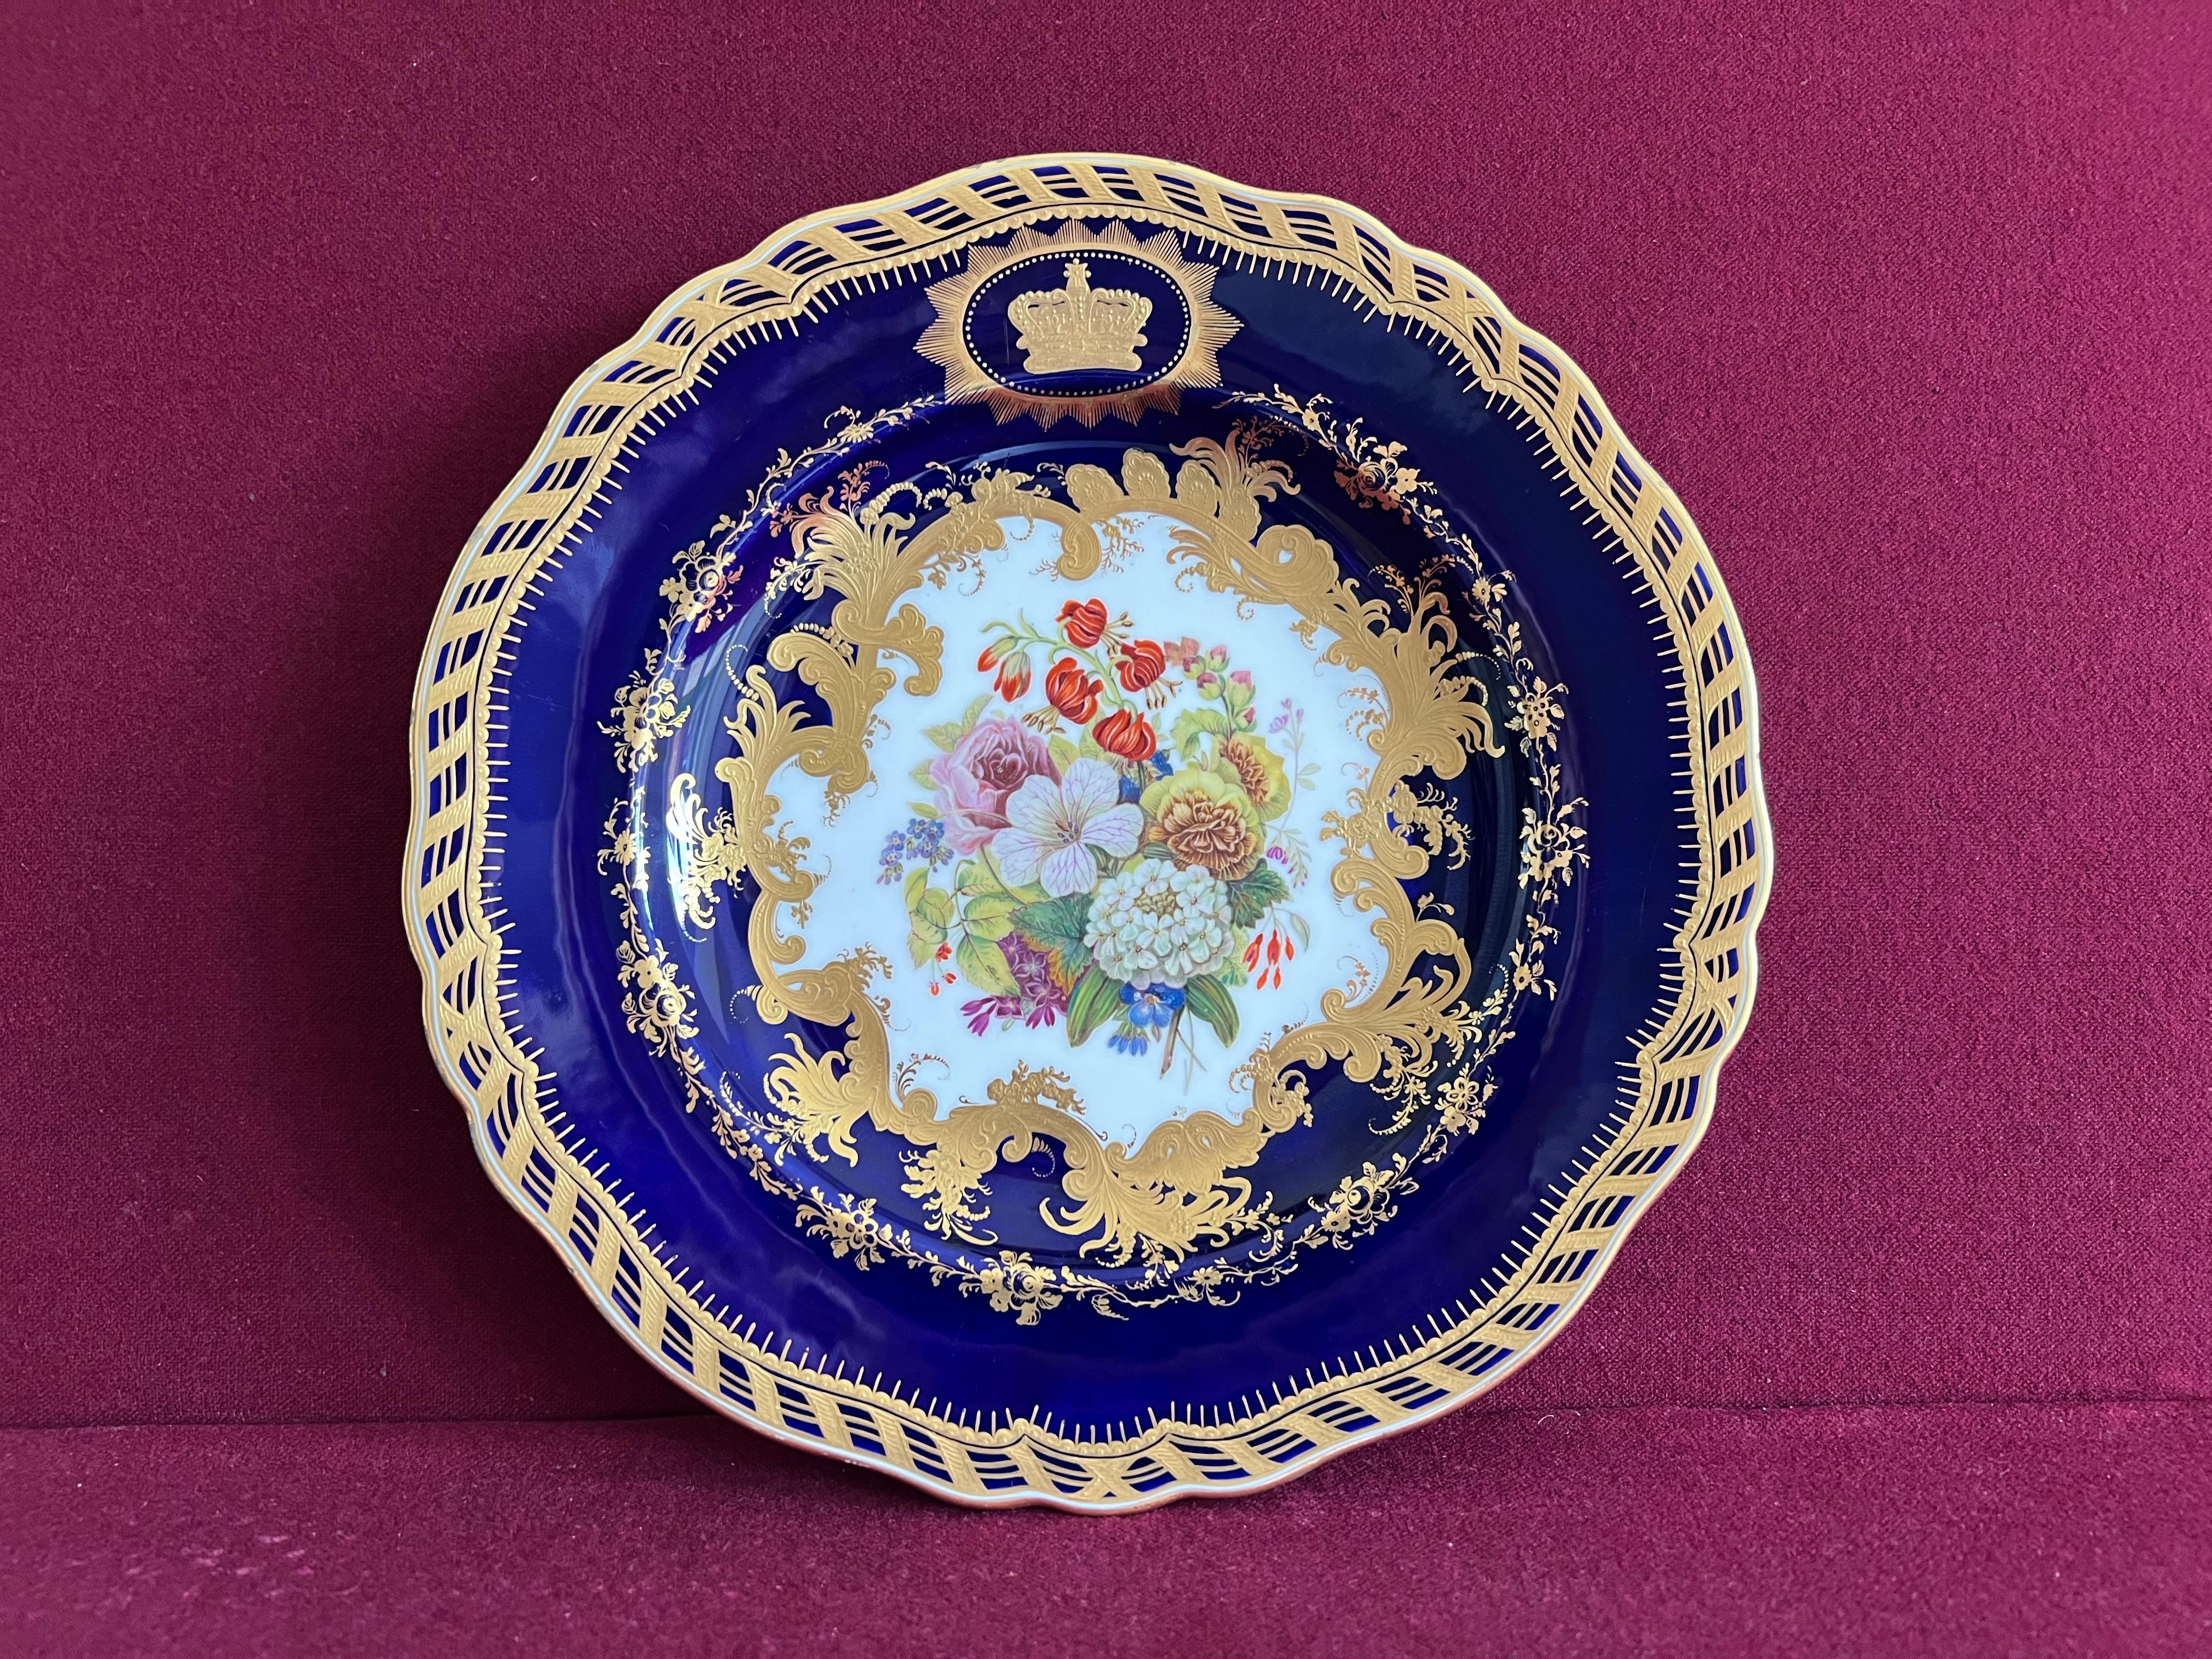 A rare and possibly unique Ridgway Royal Porcelain plate c.1850. The central reserve very finely decorated with a bouquet of flowers, the border decorated with a deep cobalt blue ground and finely tooled paste gilding with the Royal Crown within a